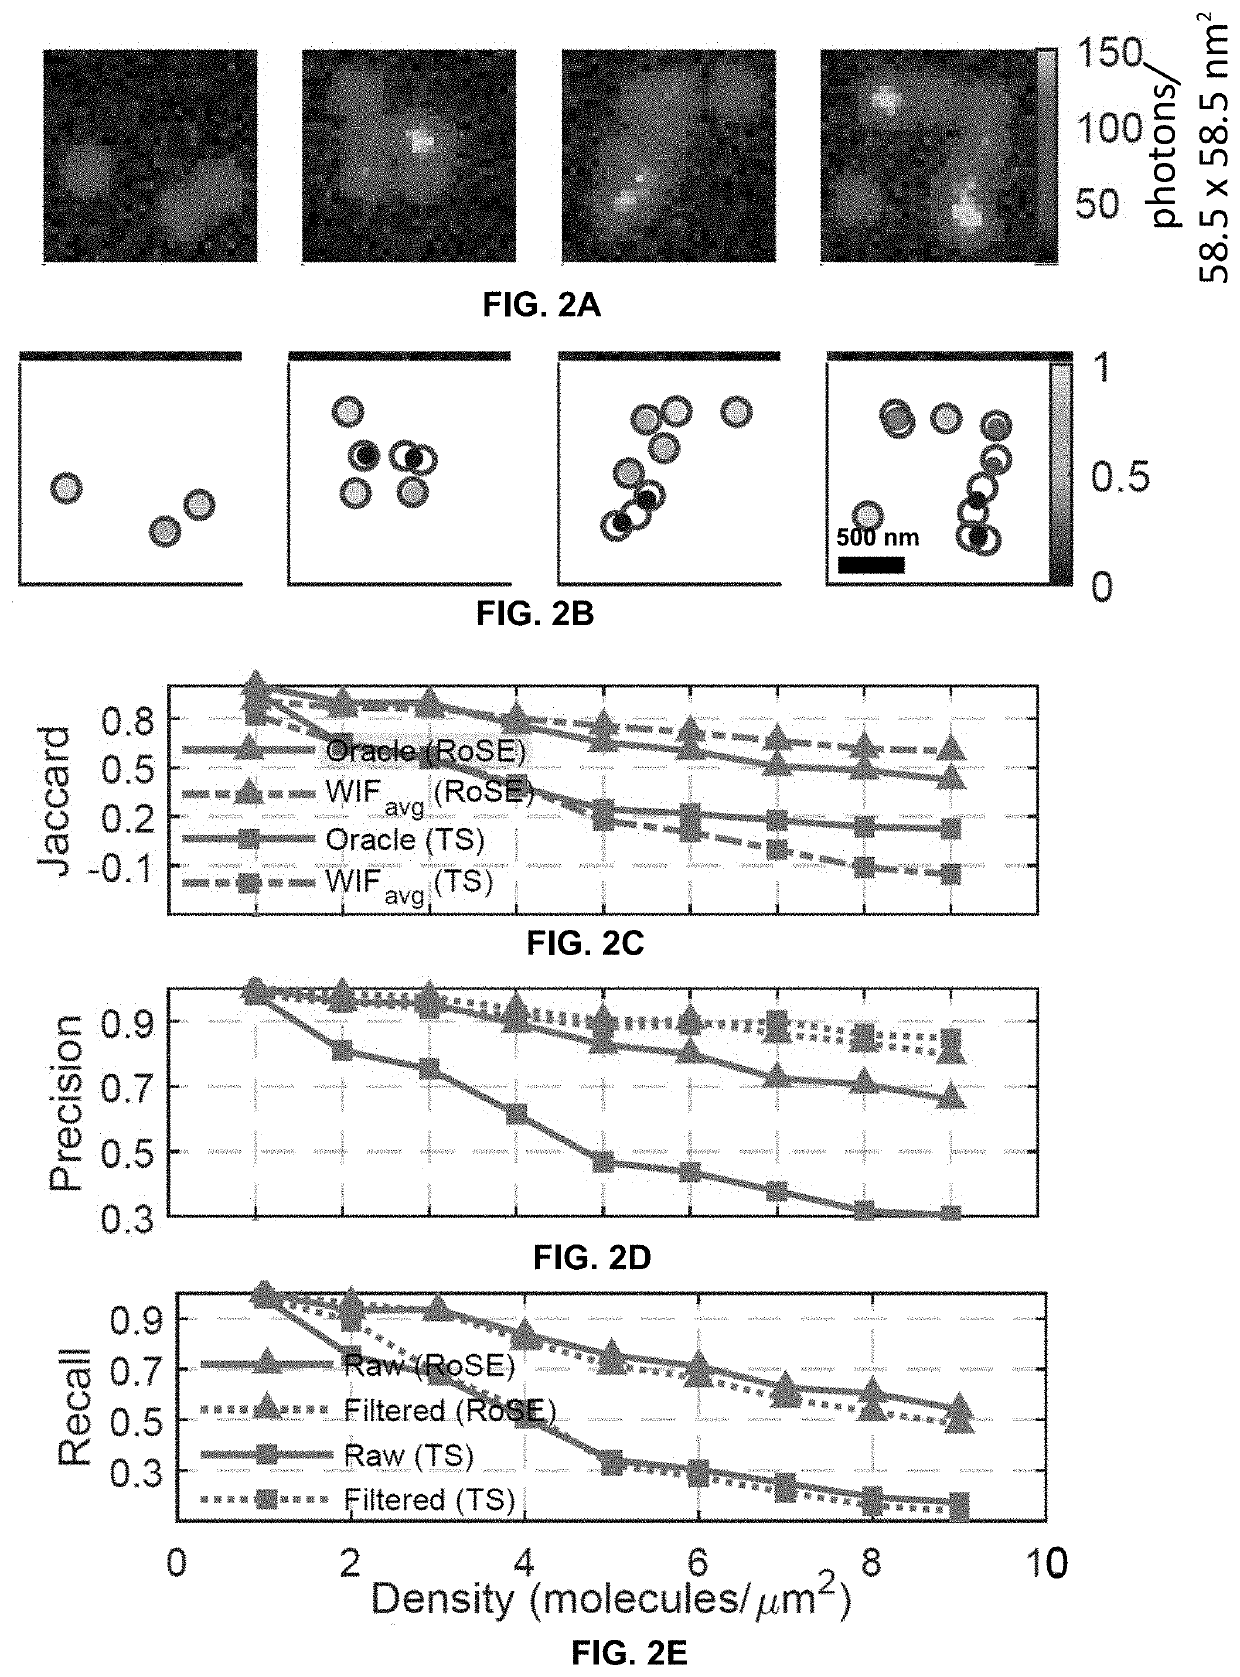 Methods for quantifying and enhancing accuracy in microscopy using measures of localization confidence